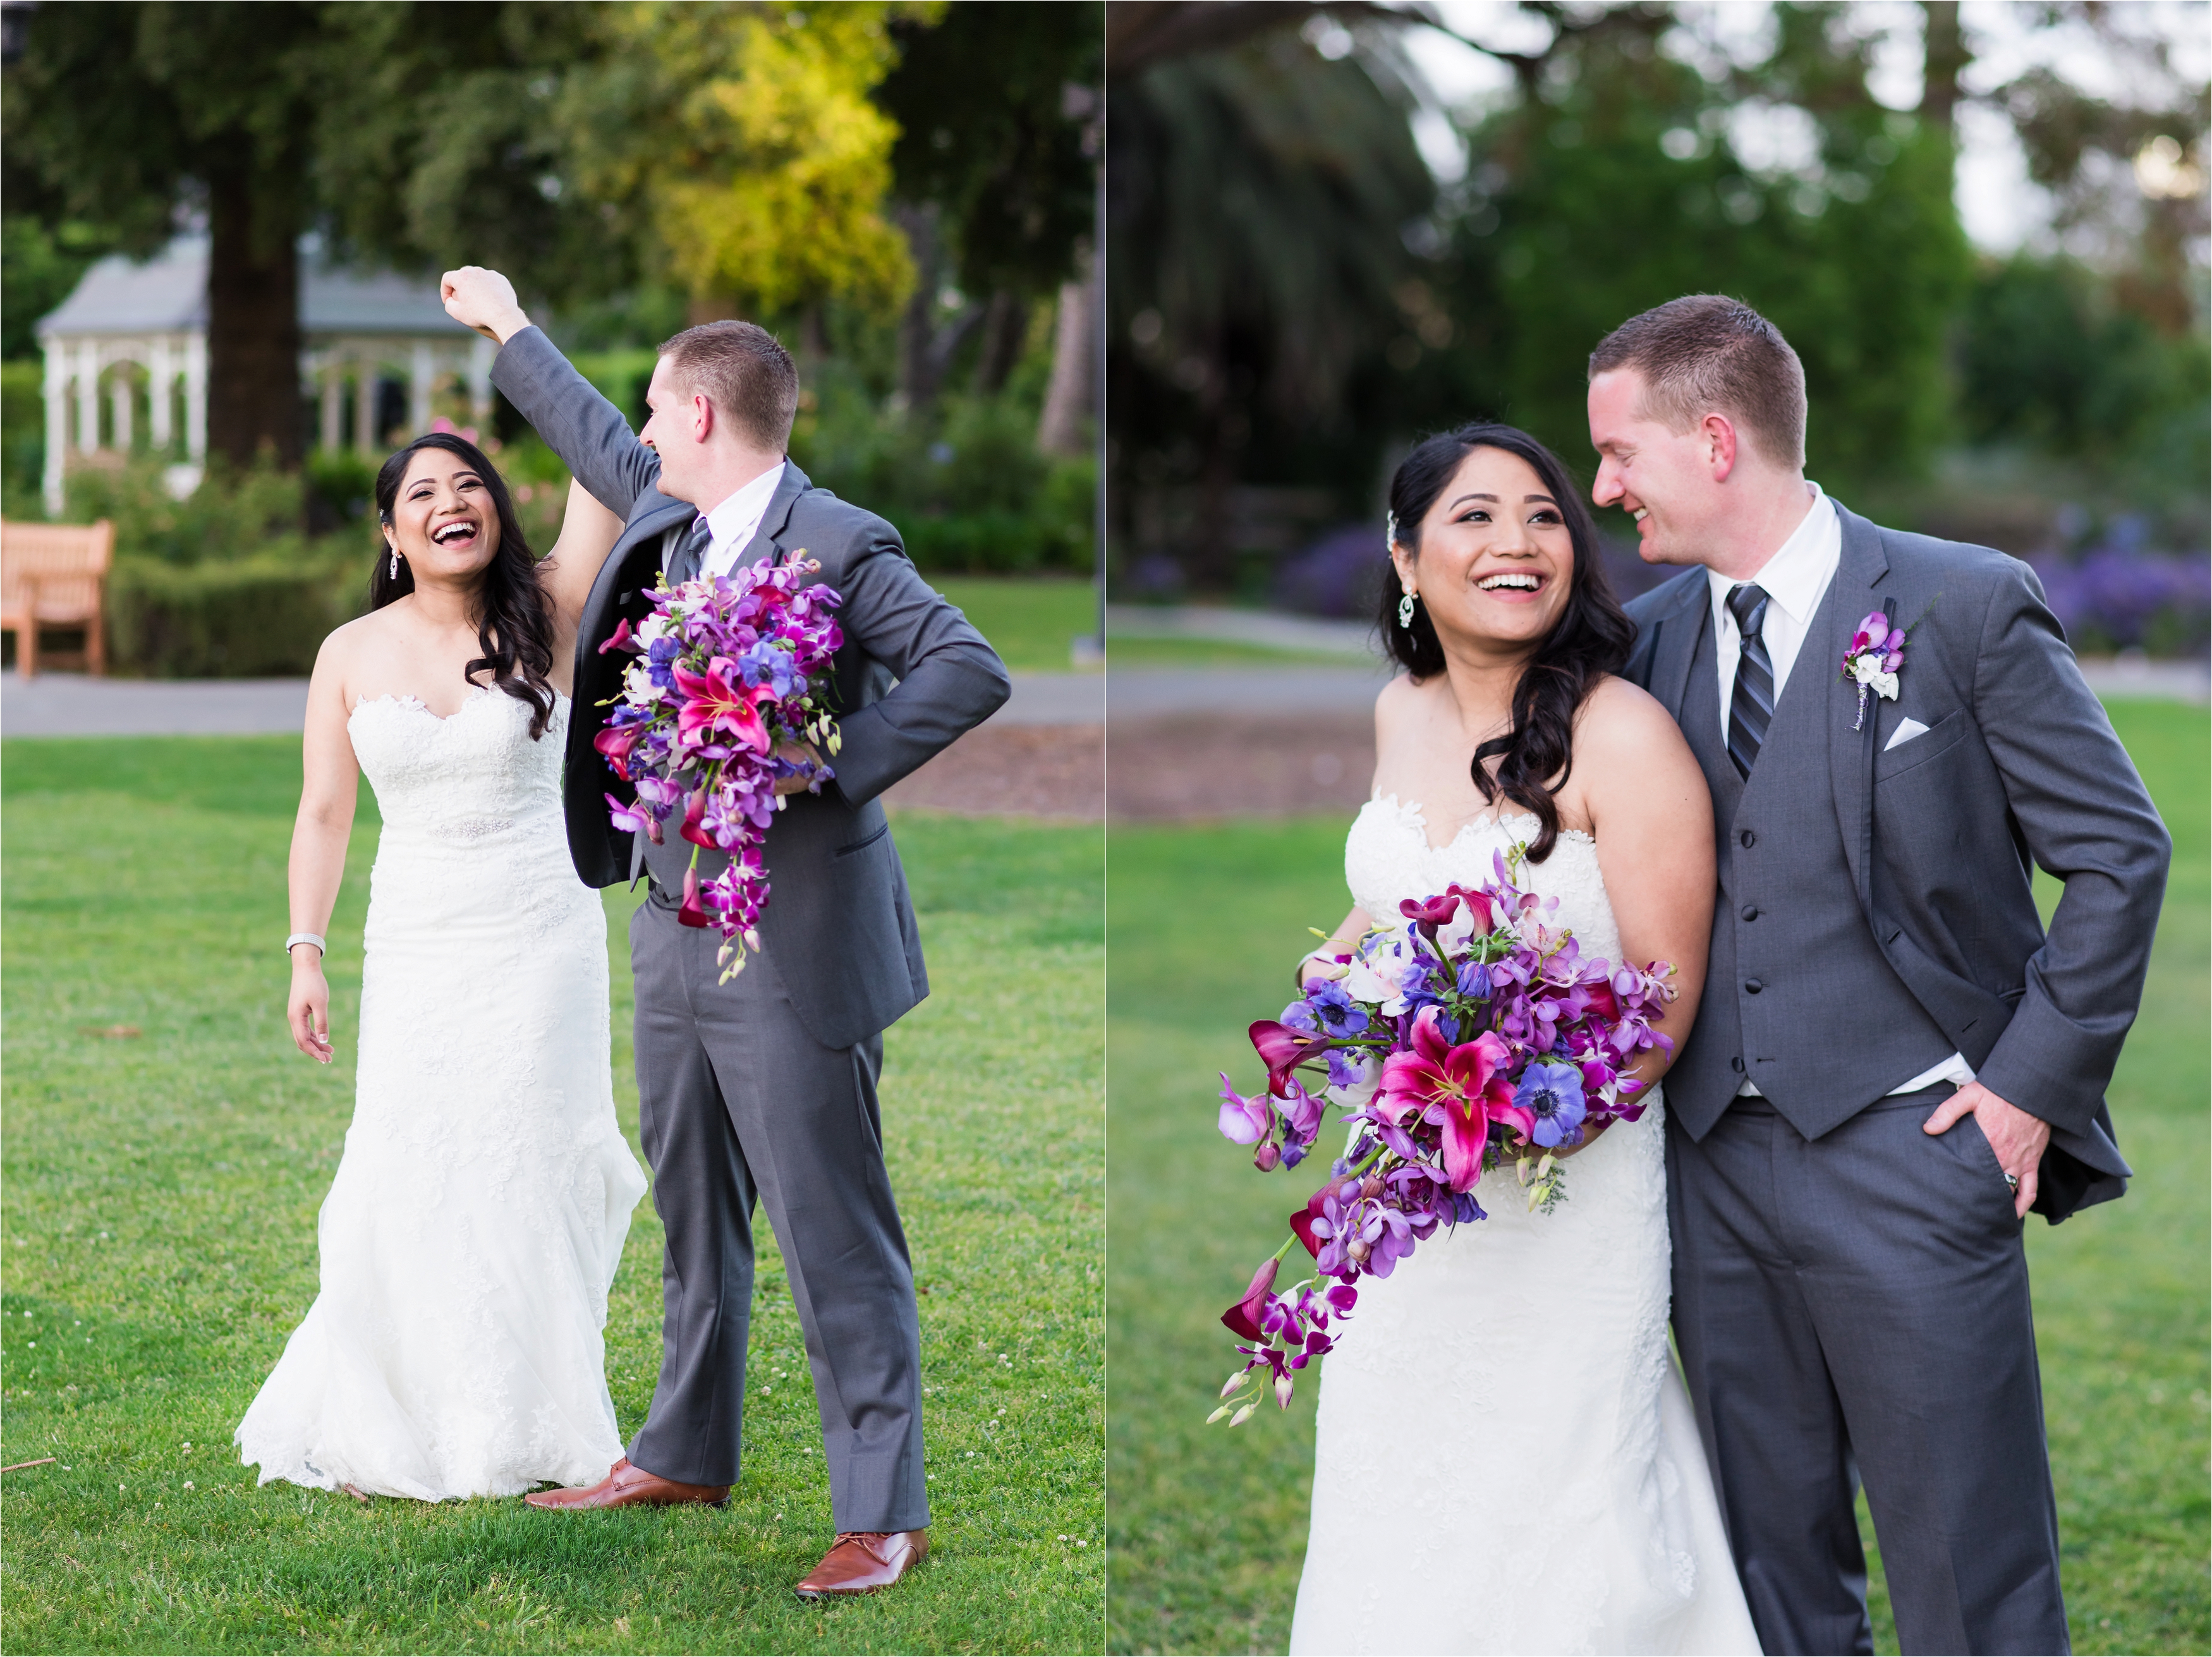 Wedding couple dances and laughs on lawn at Camarillo Ranch House